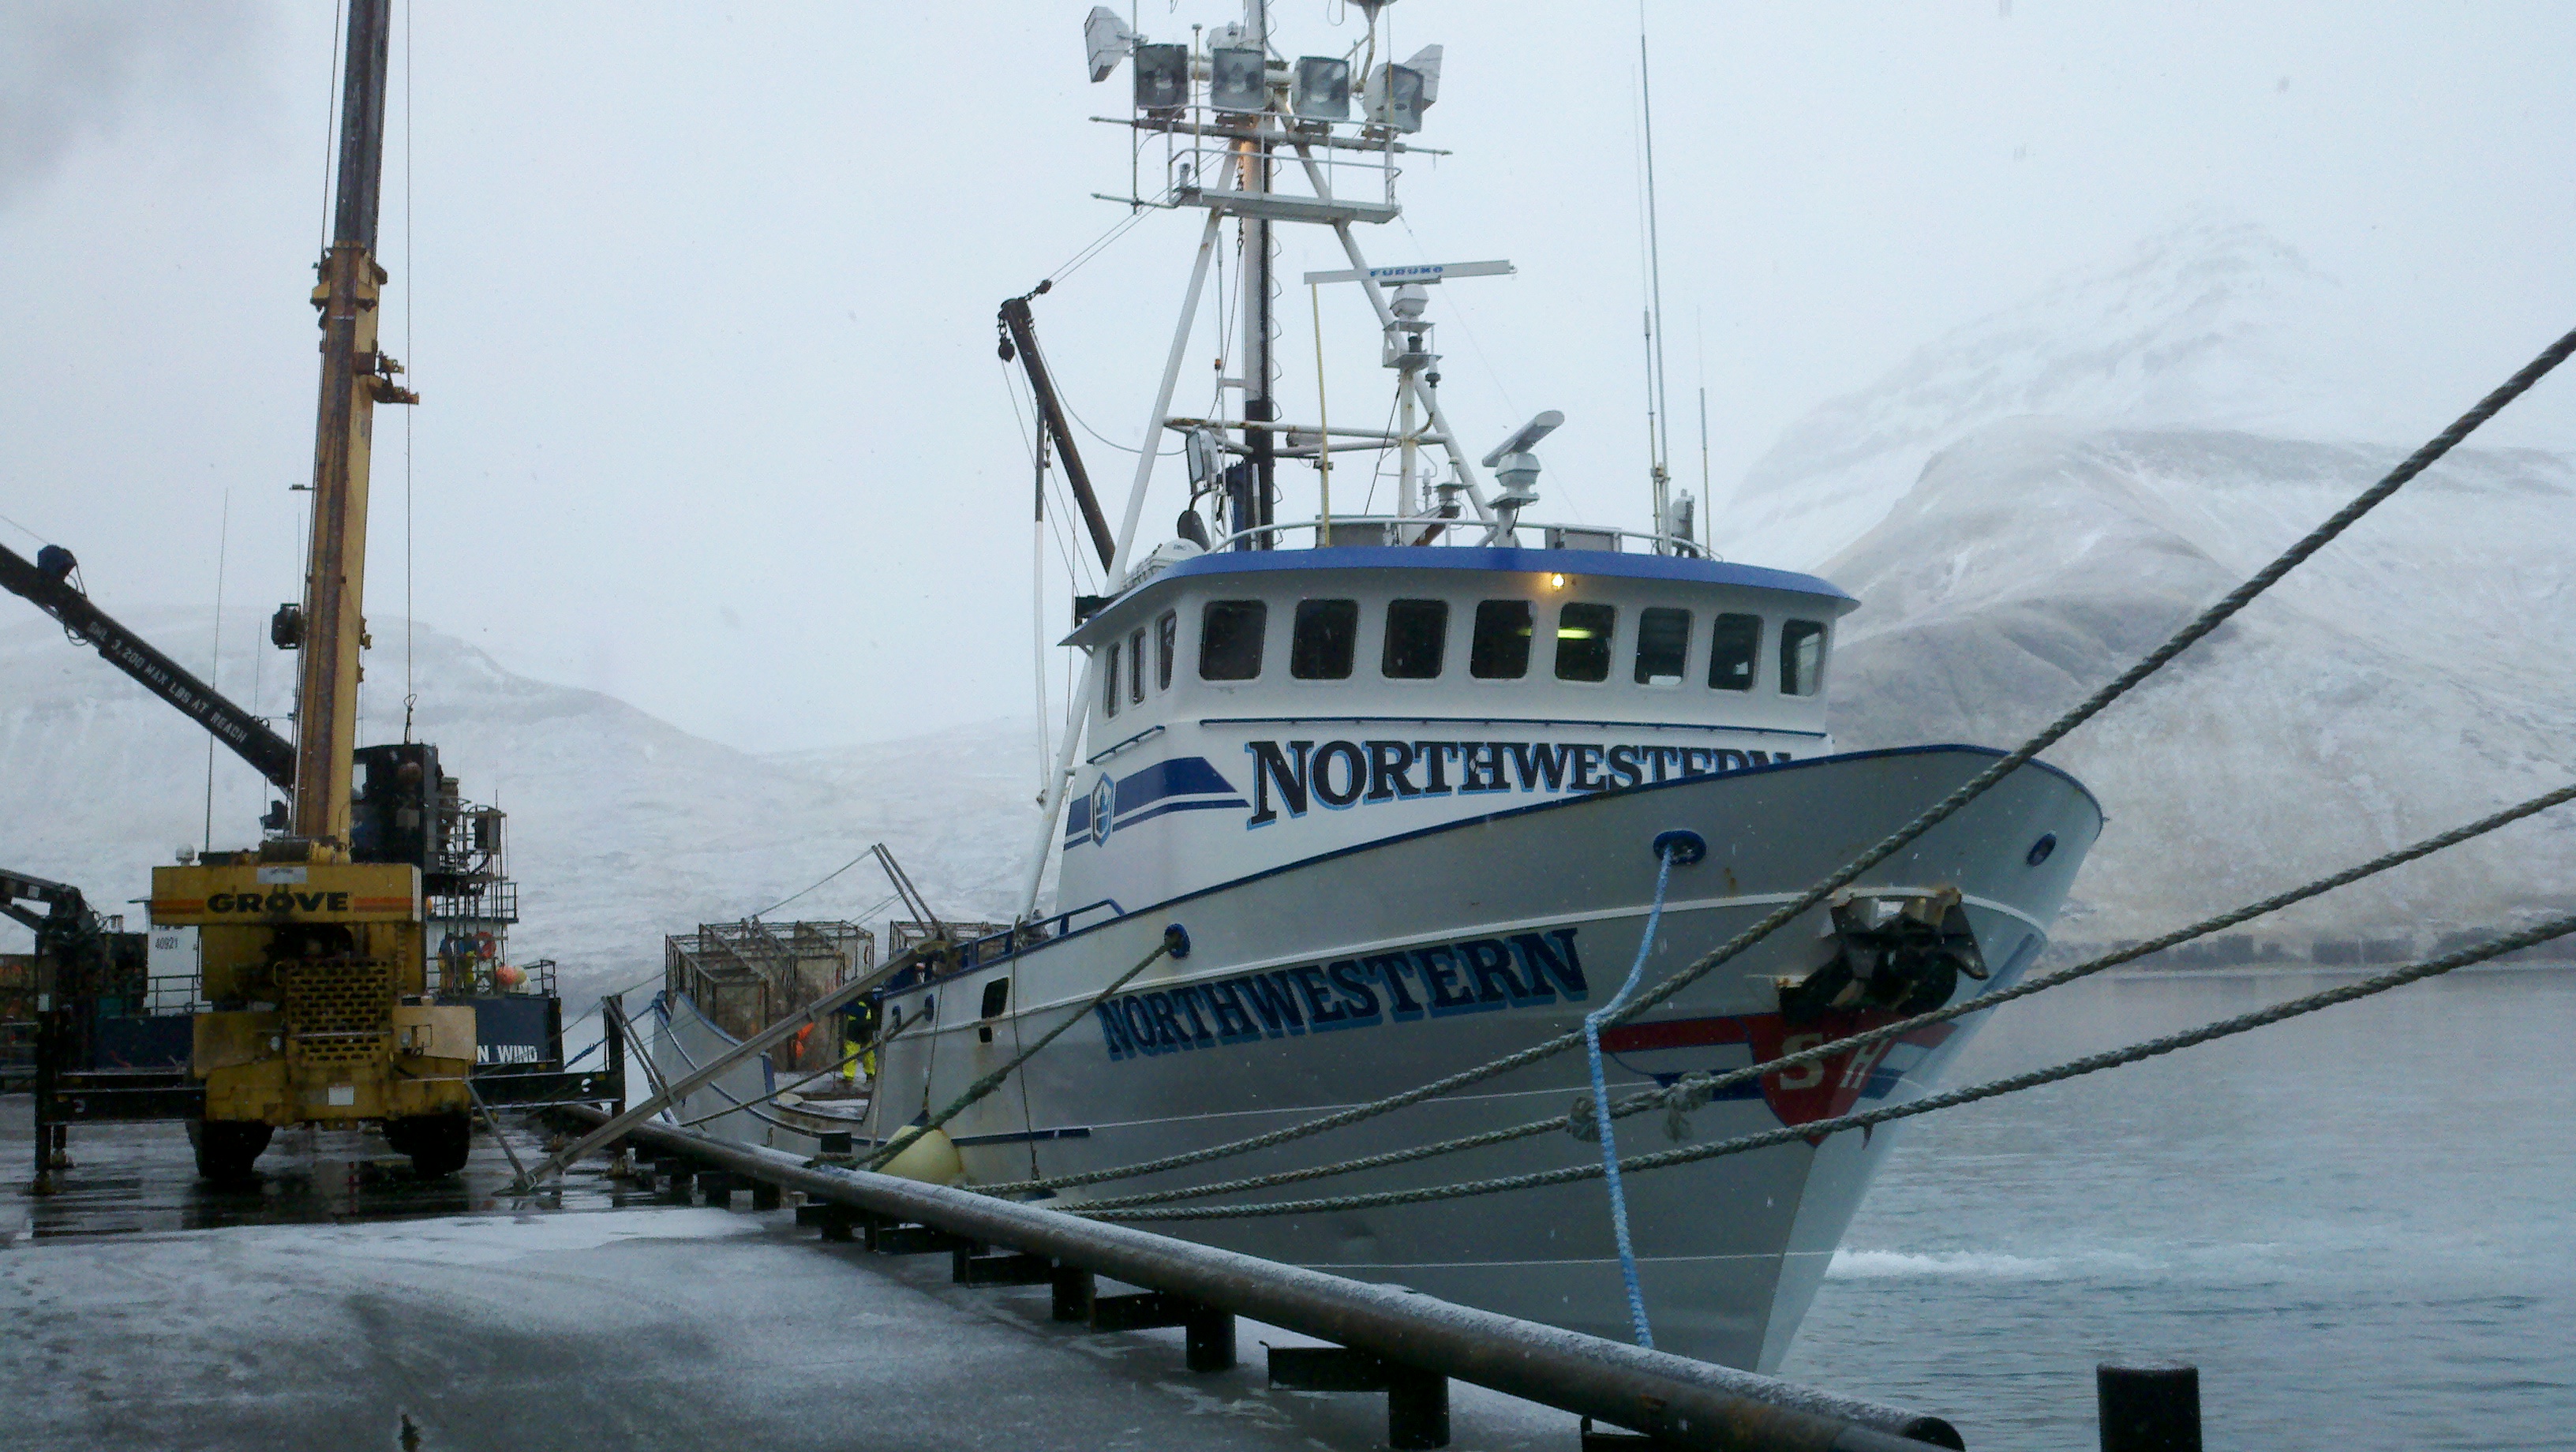 File:FV Northwestern docked at the Trident shore plant in Akutan 